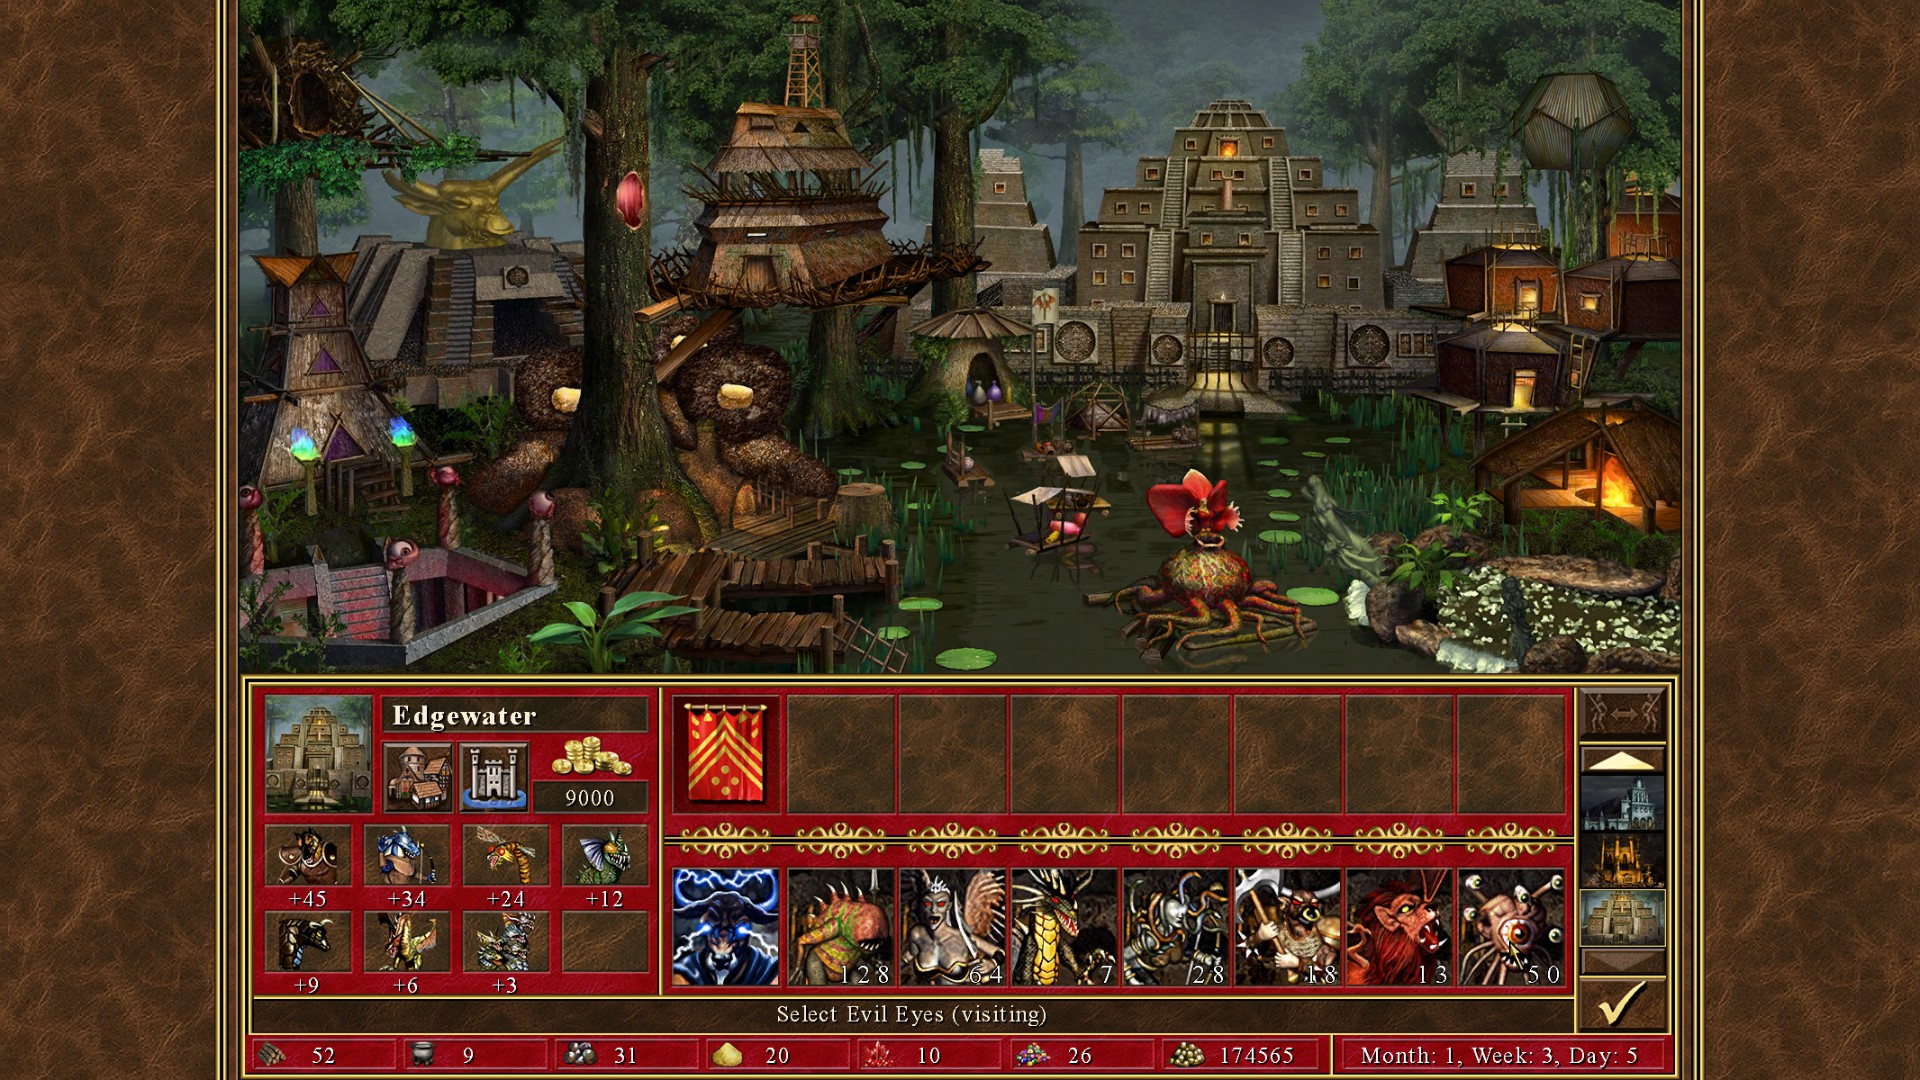 download heroes of might and magic 5